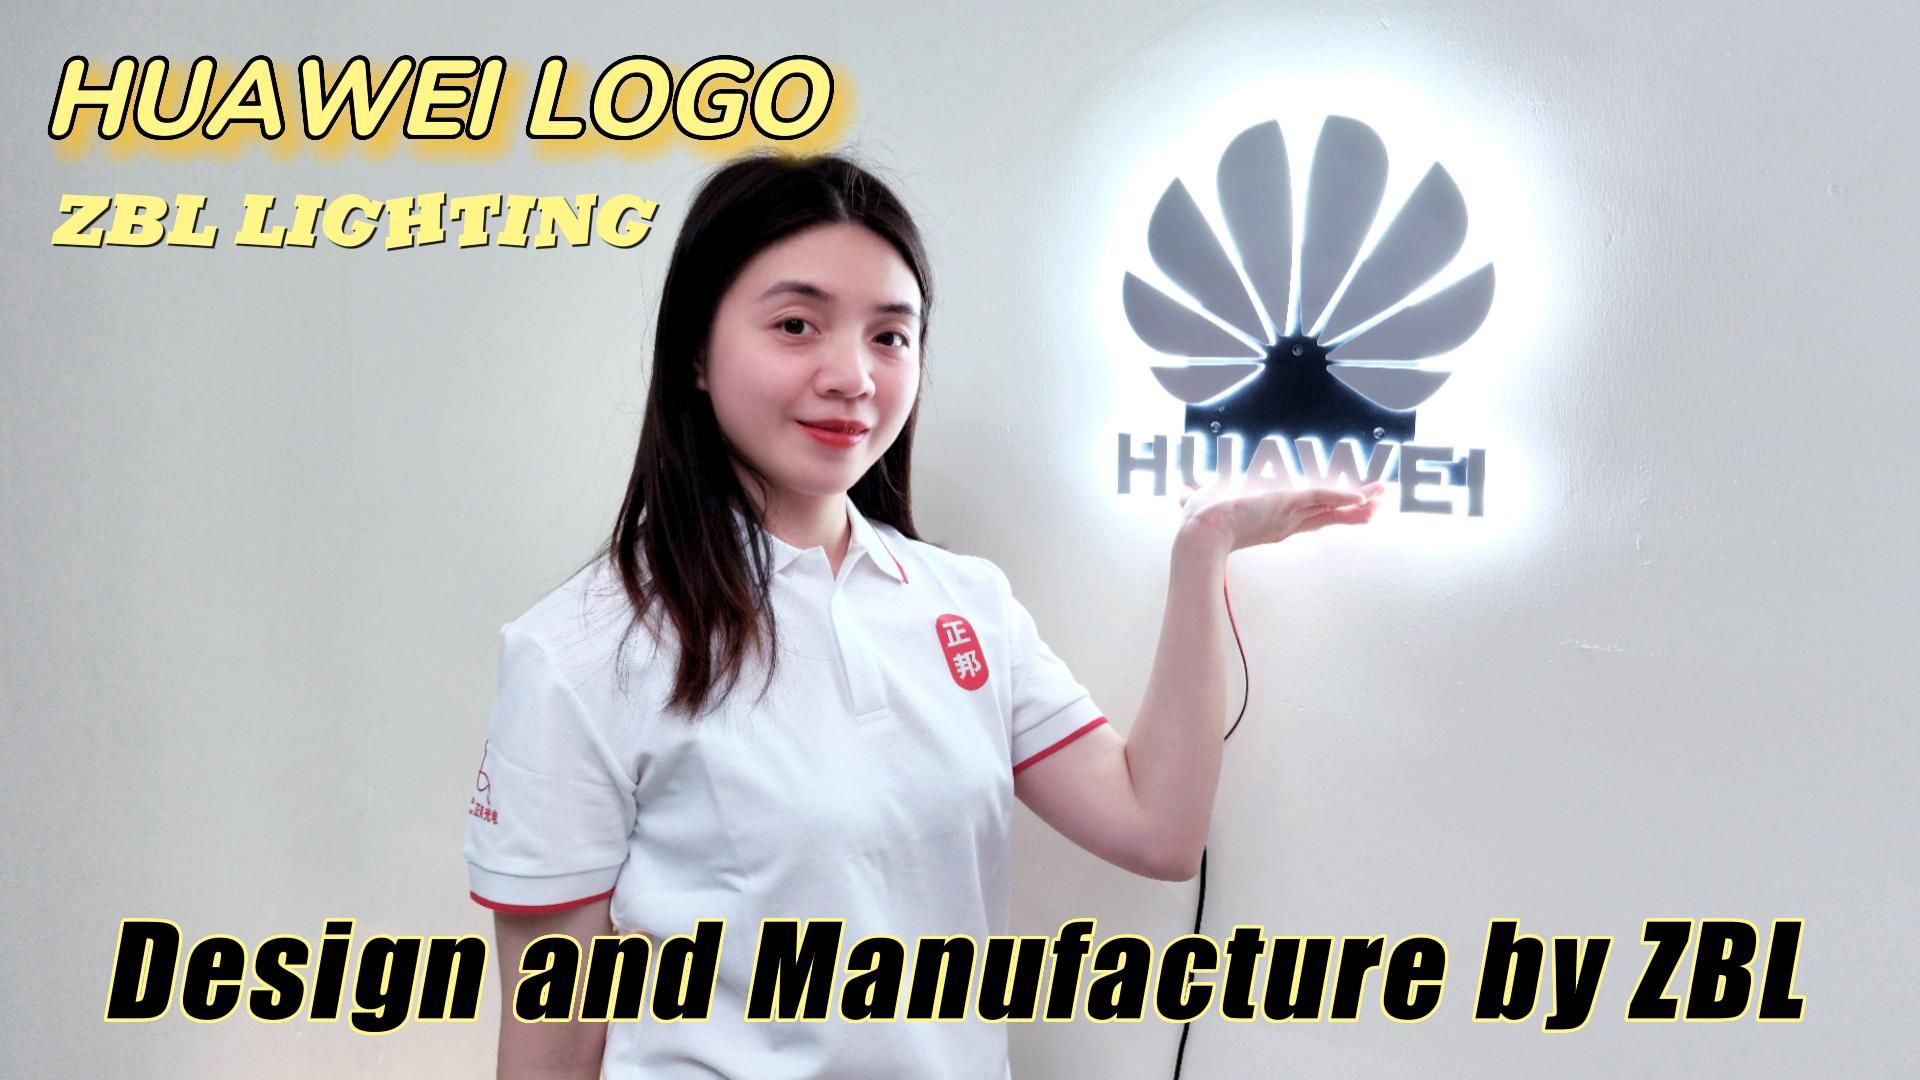 Huawei Logo Designed and Manufactured by ZBL